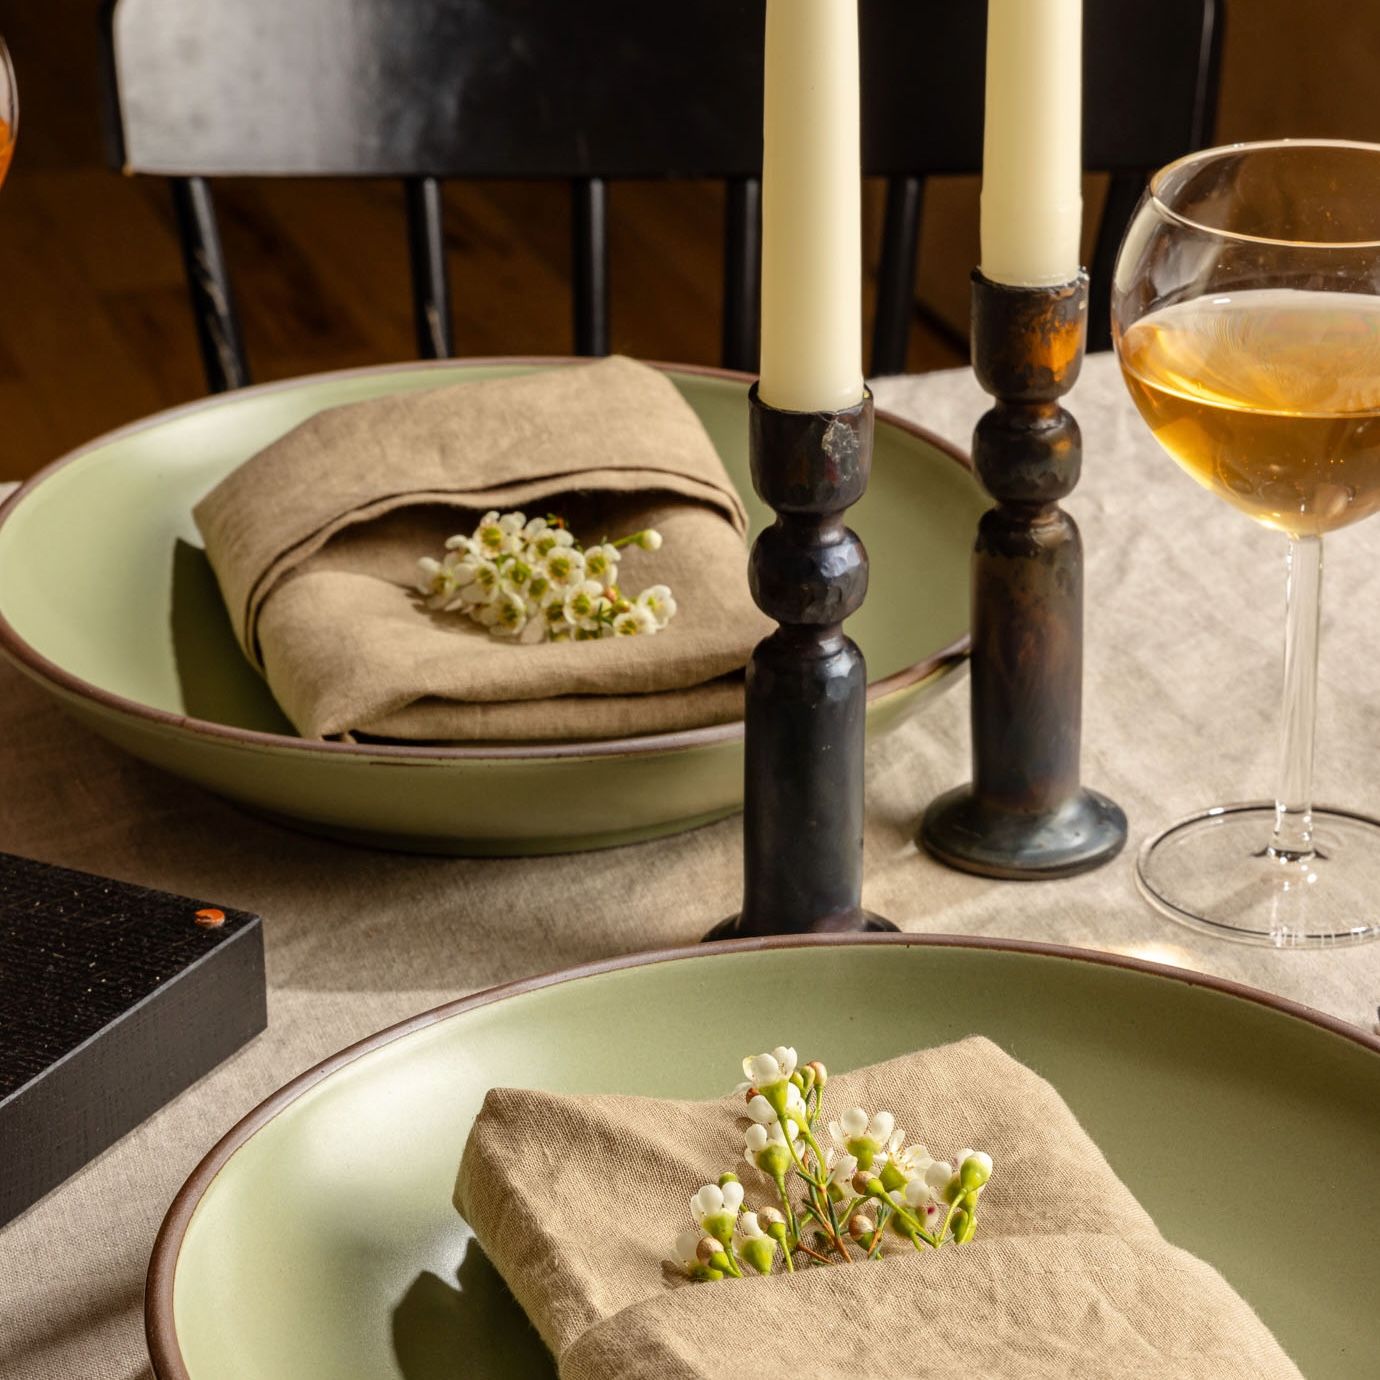 Iron candleholders with cream taper candles sit on a dinner table surrounded by two plates in a sage green, folded napkins with delicate flowers, and a glass of wine.